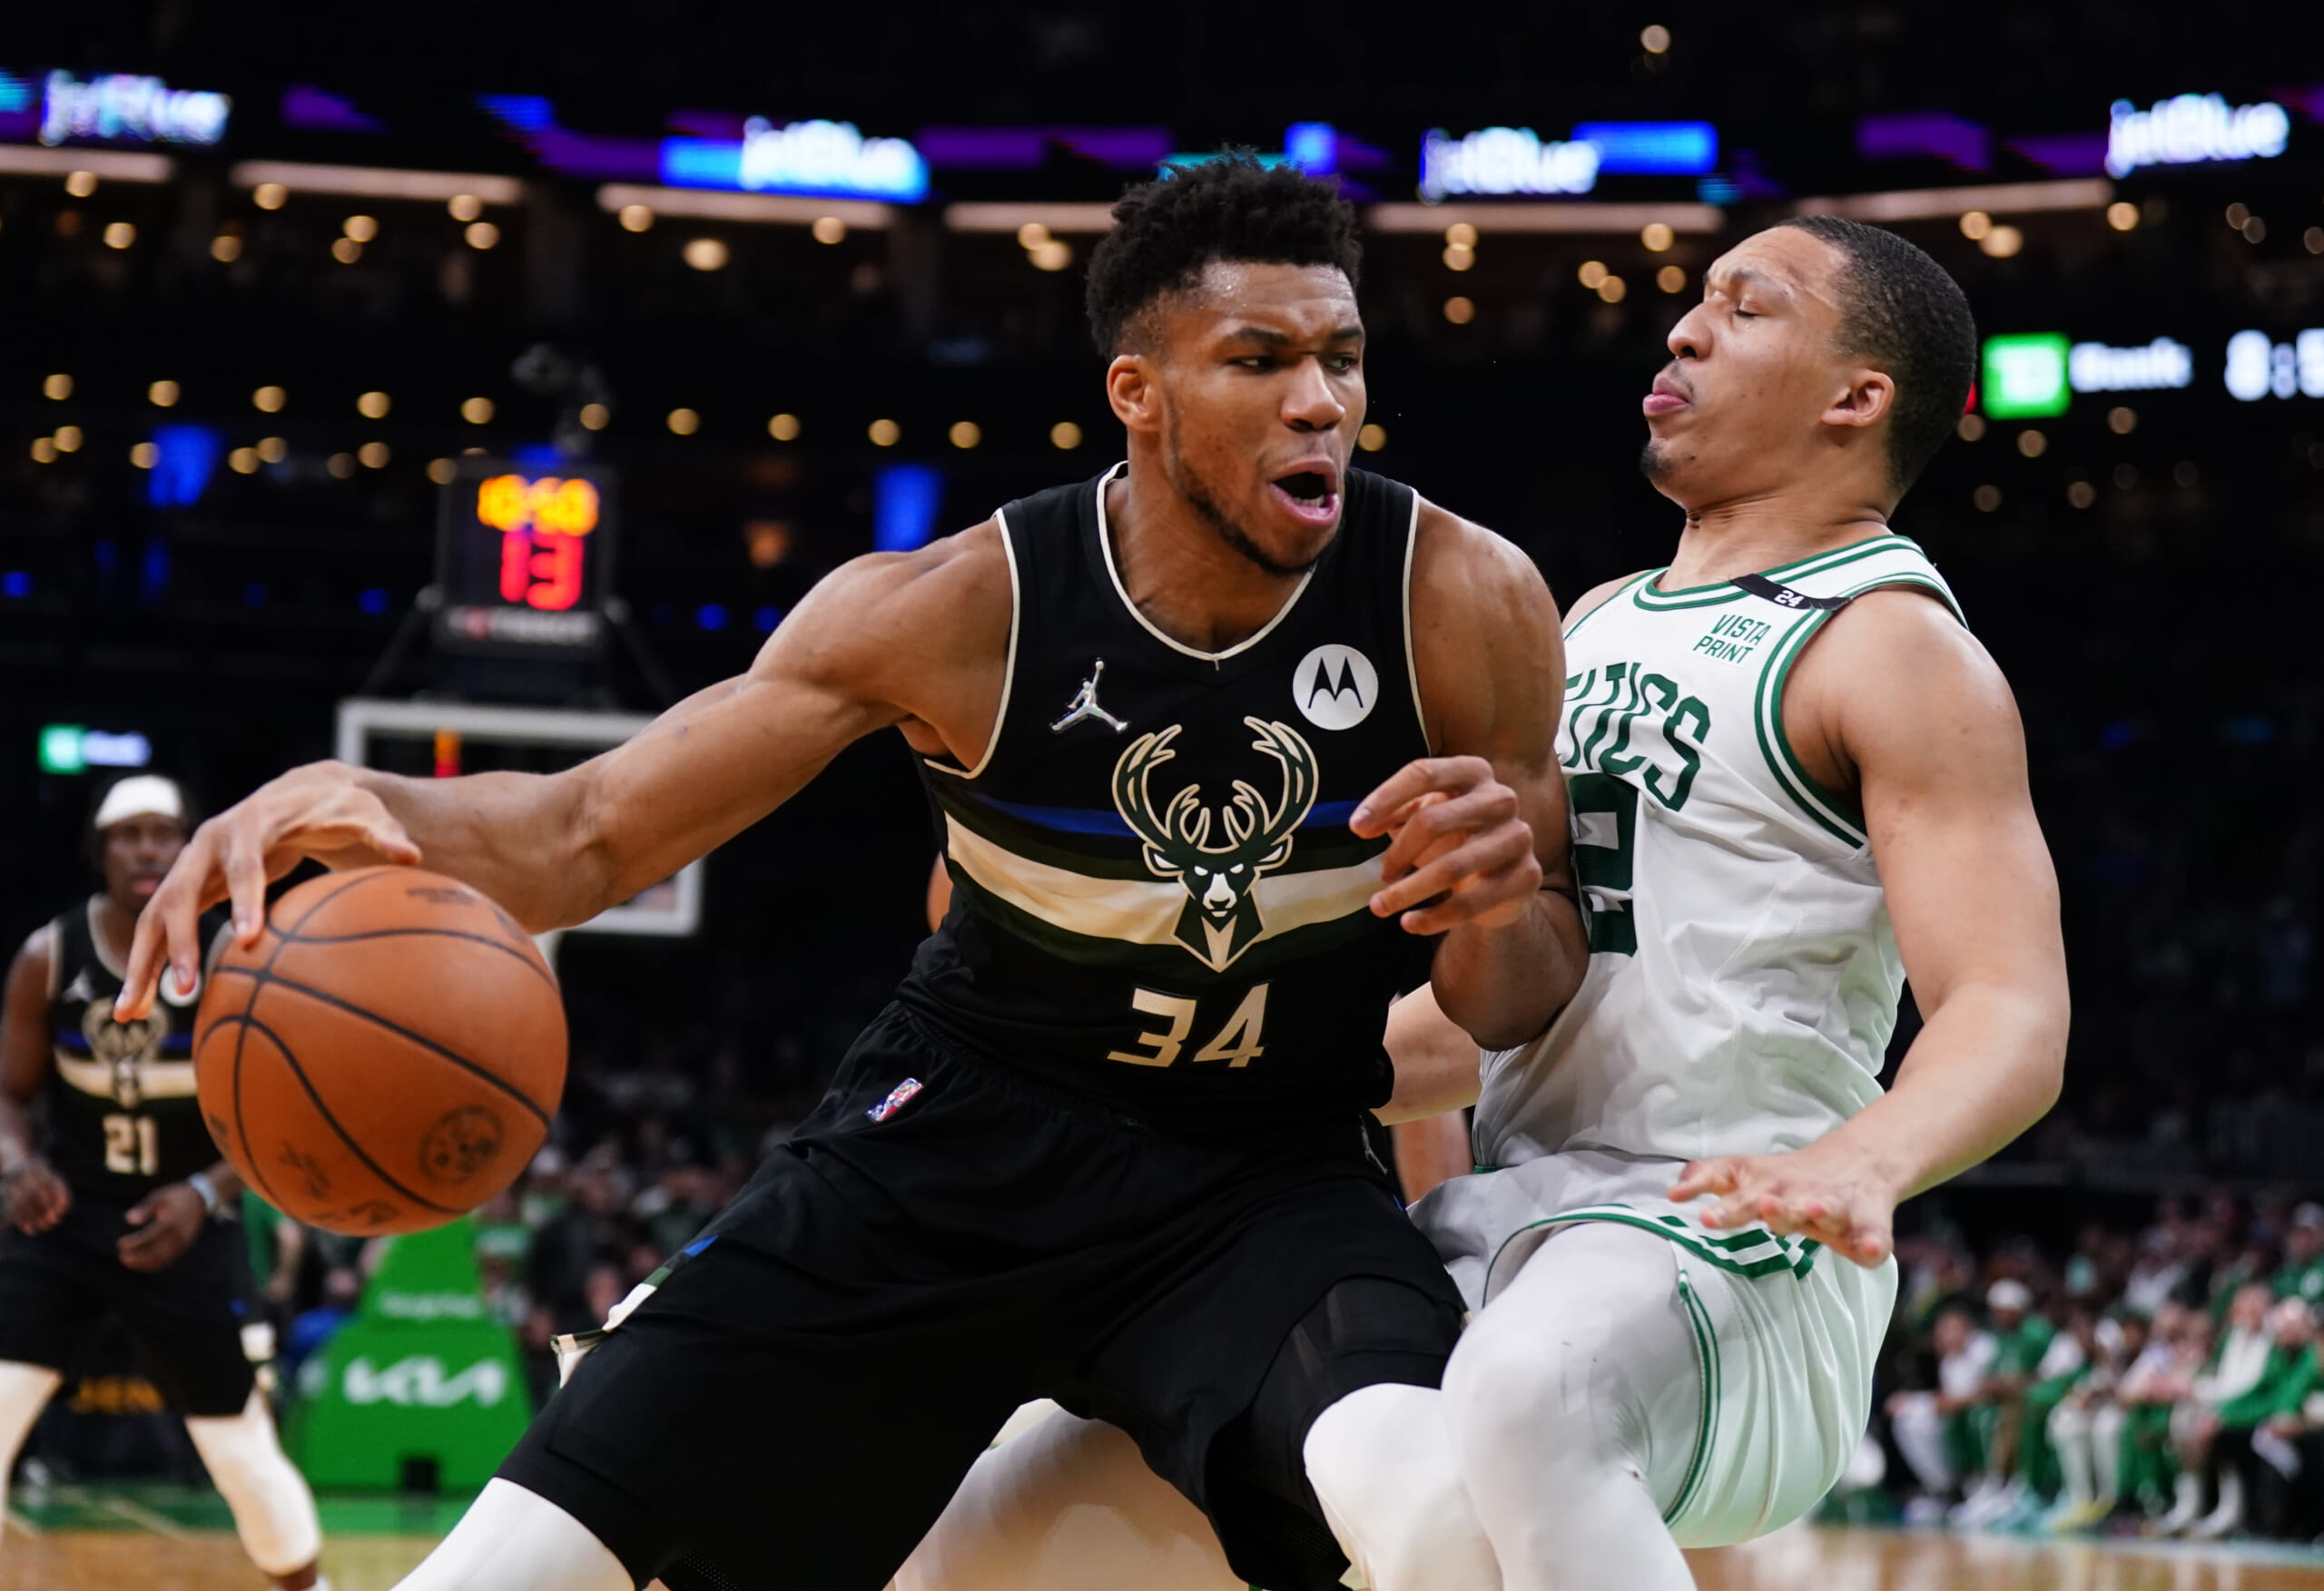 Giannis Antetokounmpo's stats though 13 games are absolutely mind